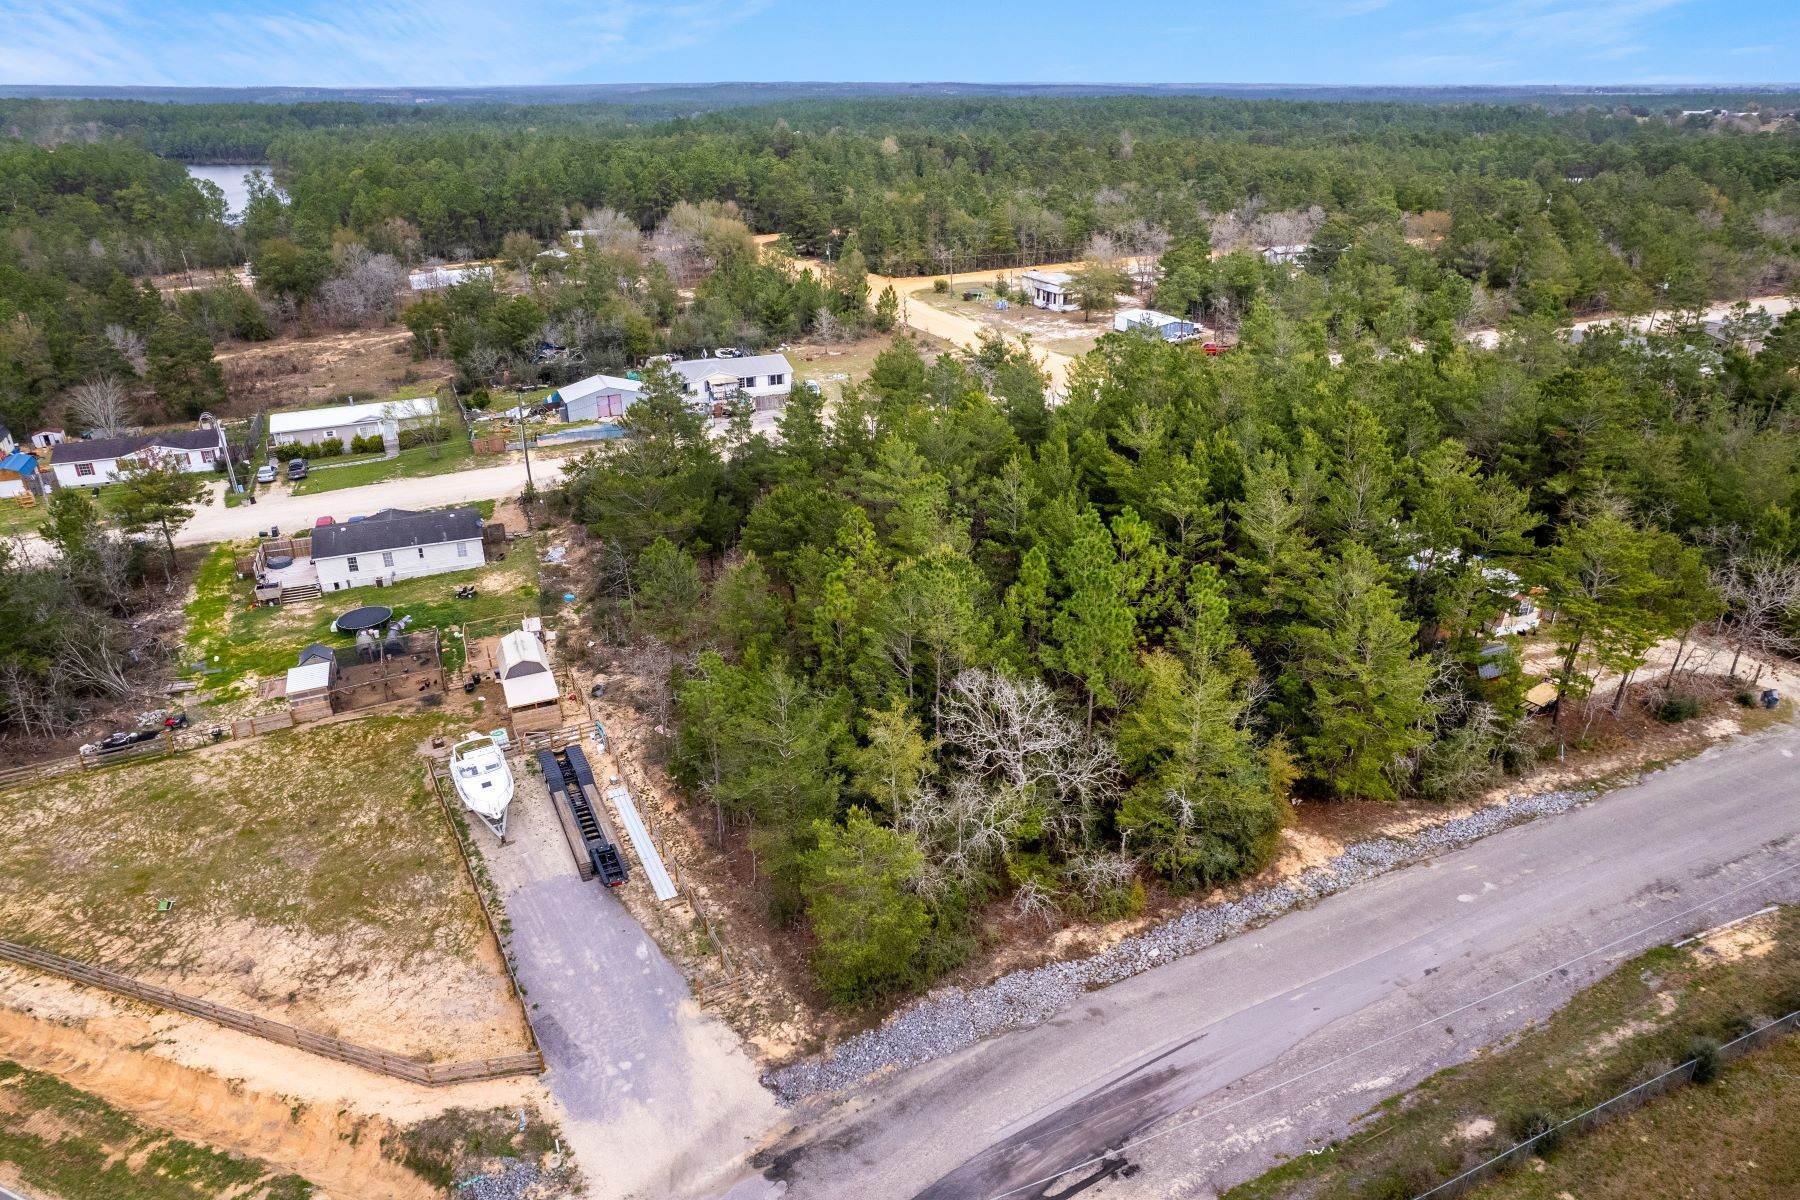 Land for Sale at Buildable Lot In Convenient Location With No HOA Fees Lot 16 E. Tiger Lily Lane Defuniak Springs, Florida 32433 United States